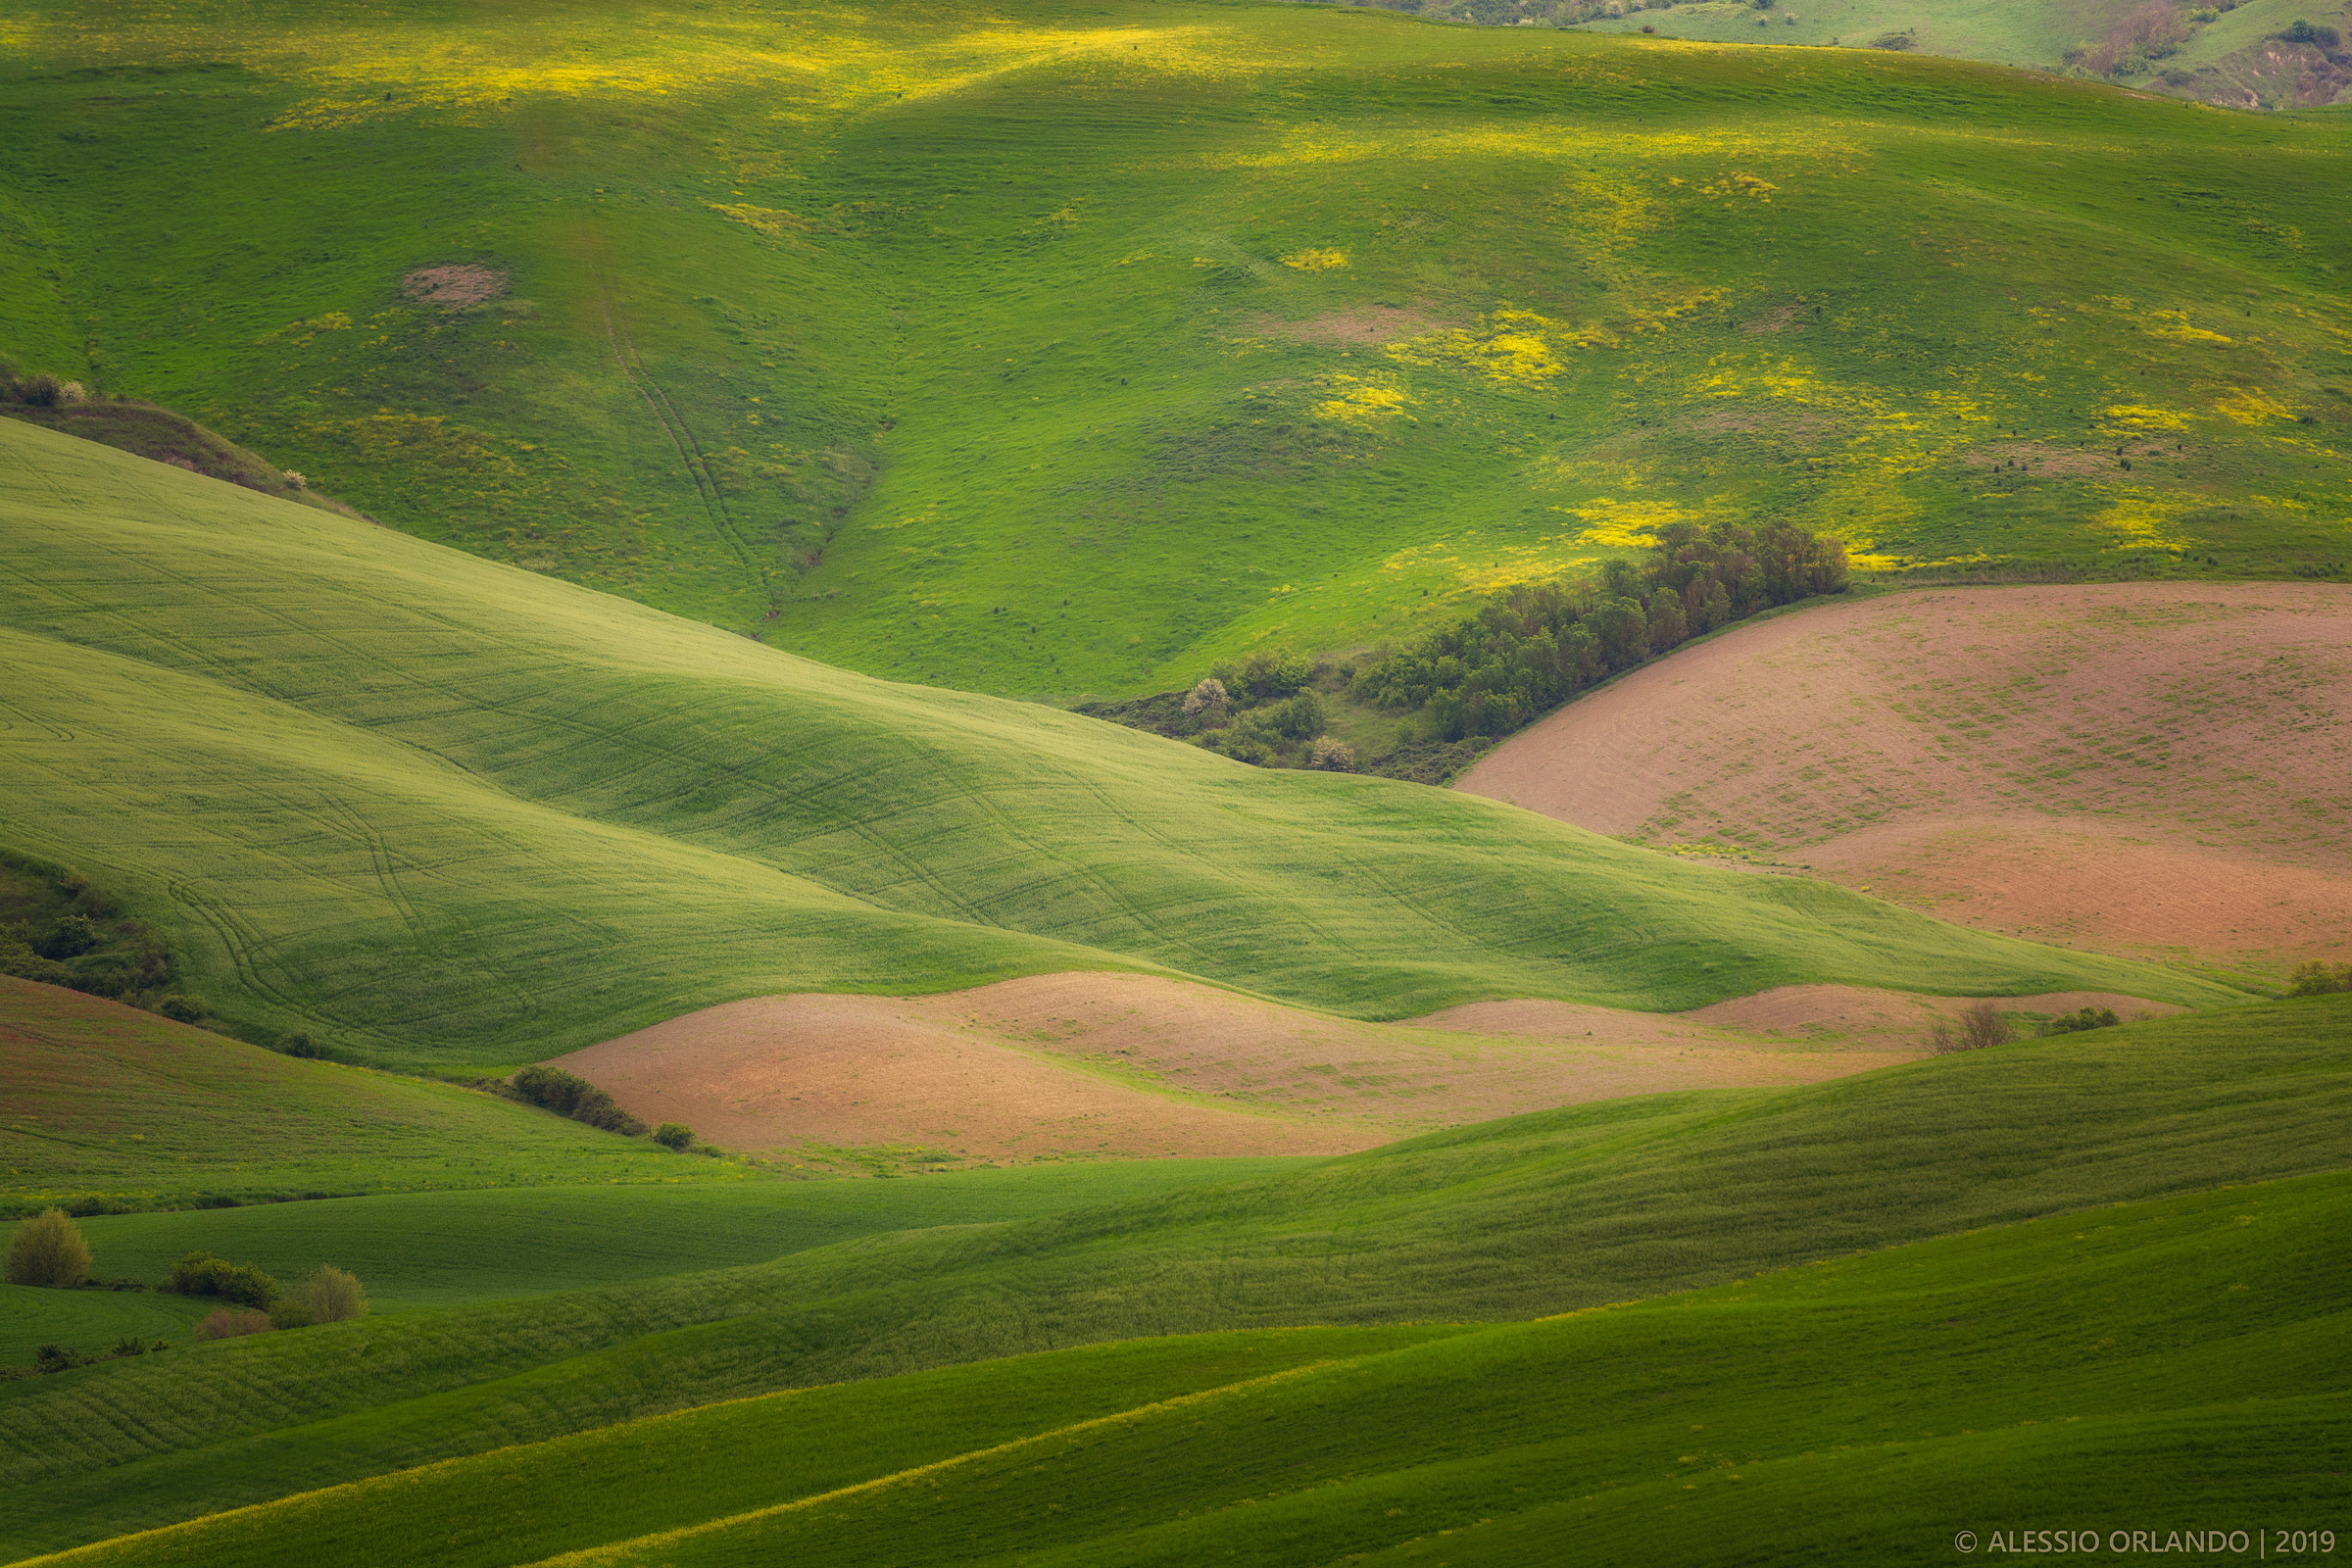 Green is the Tuscany...